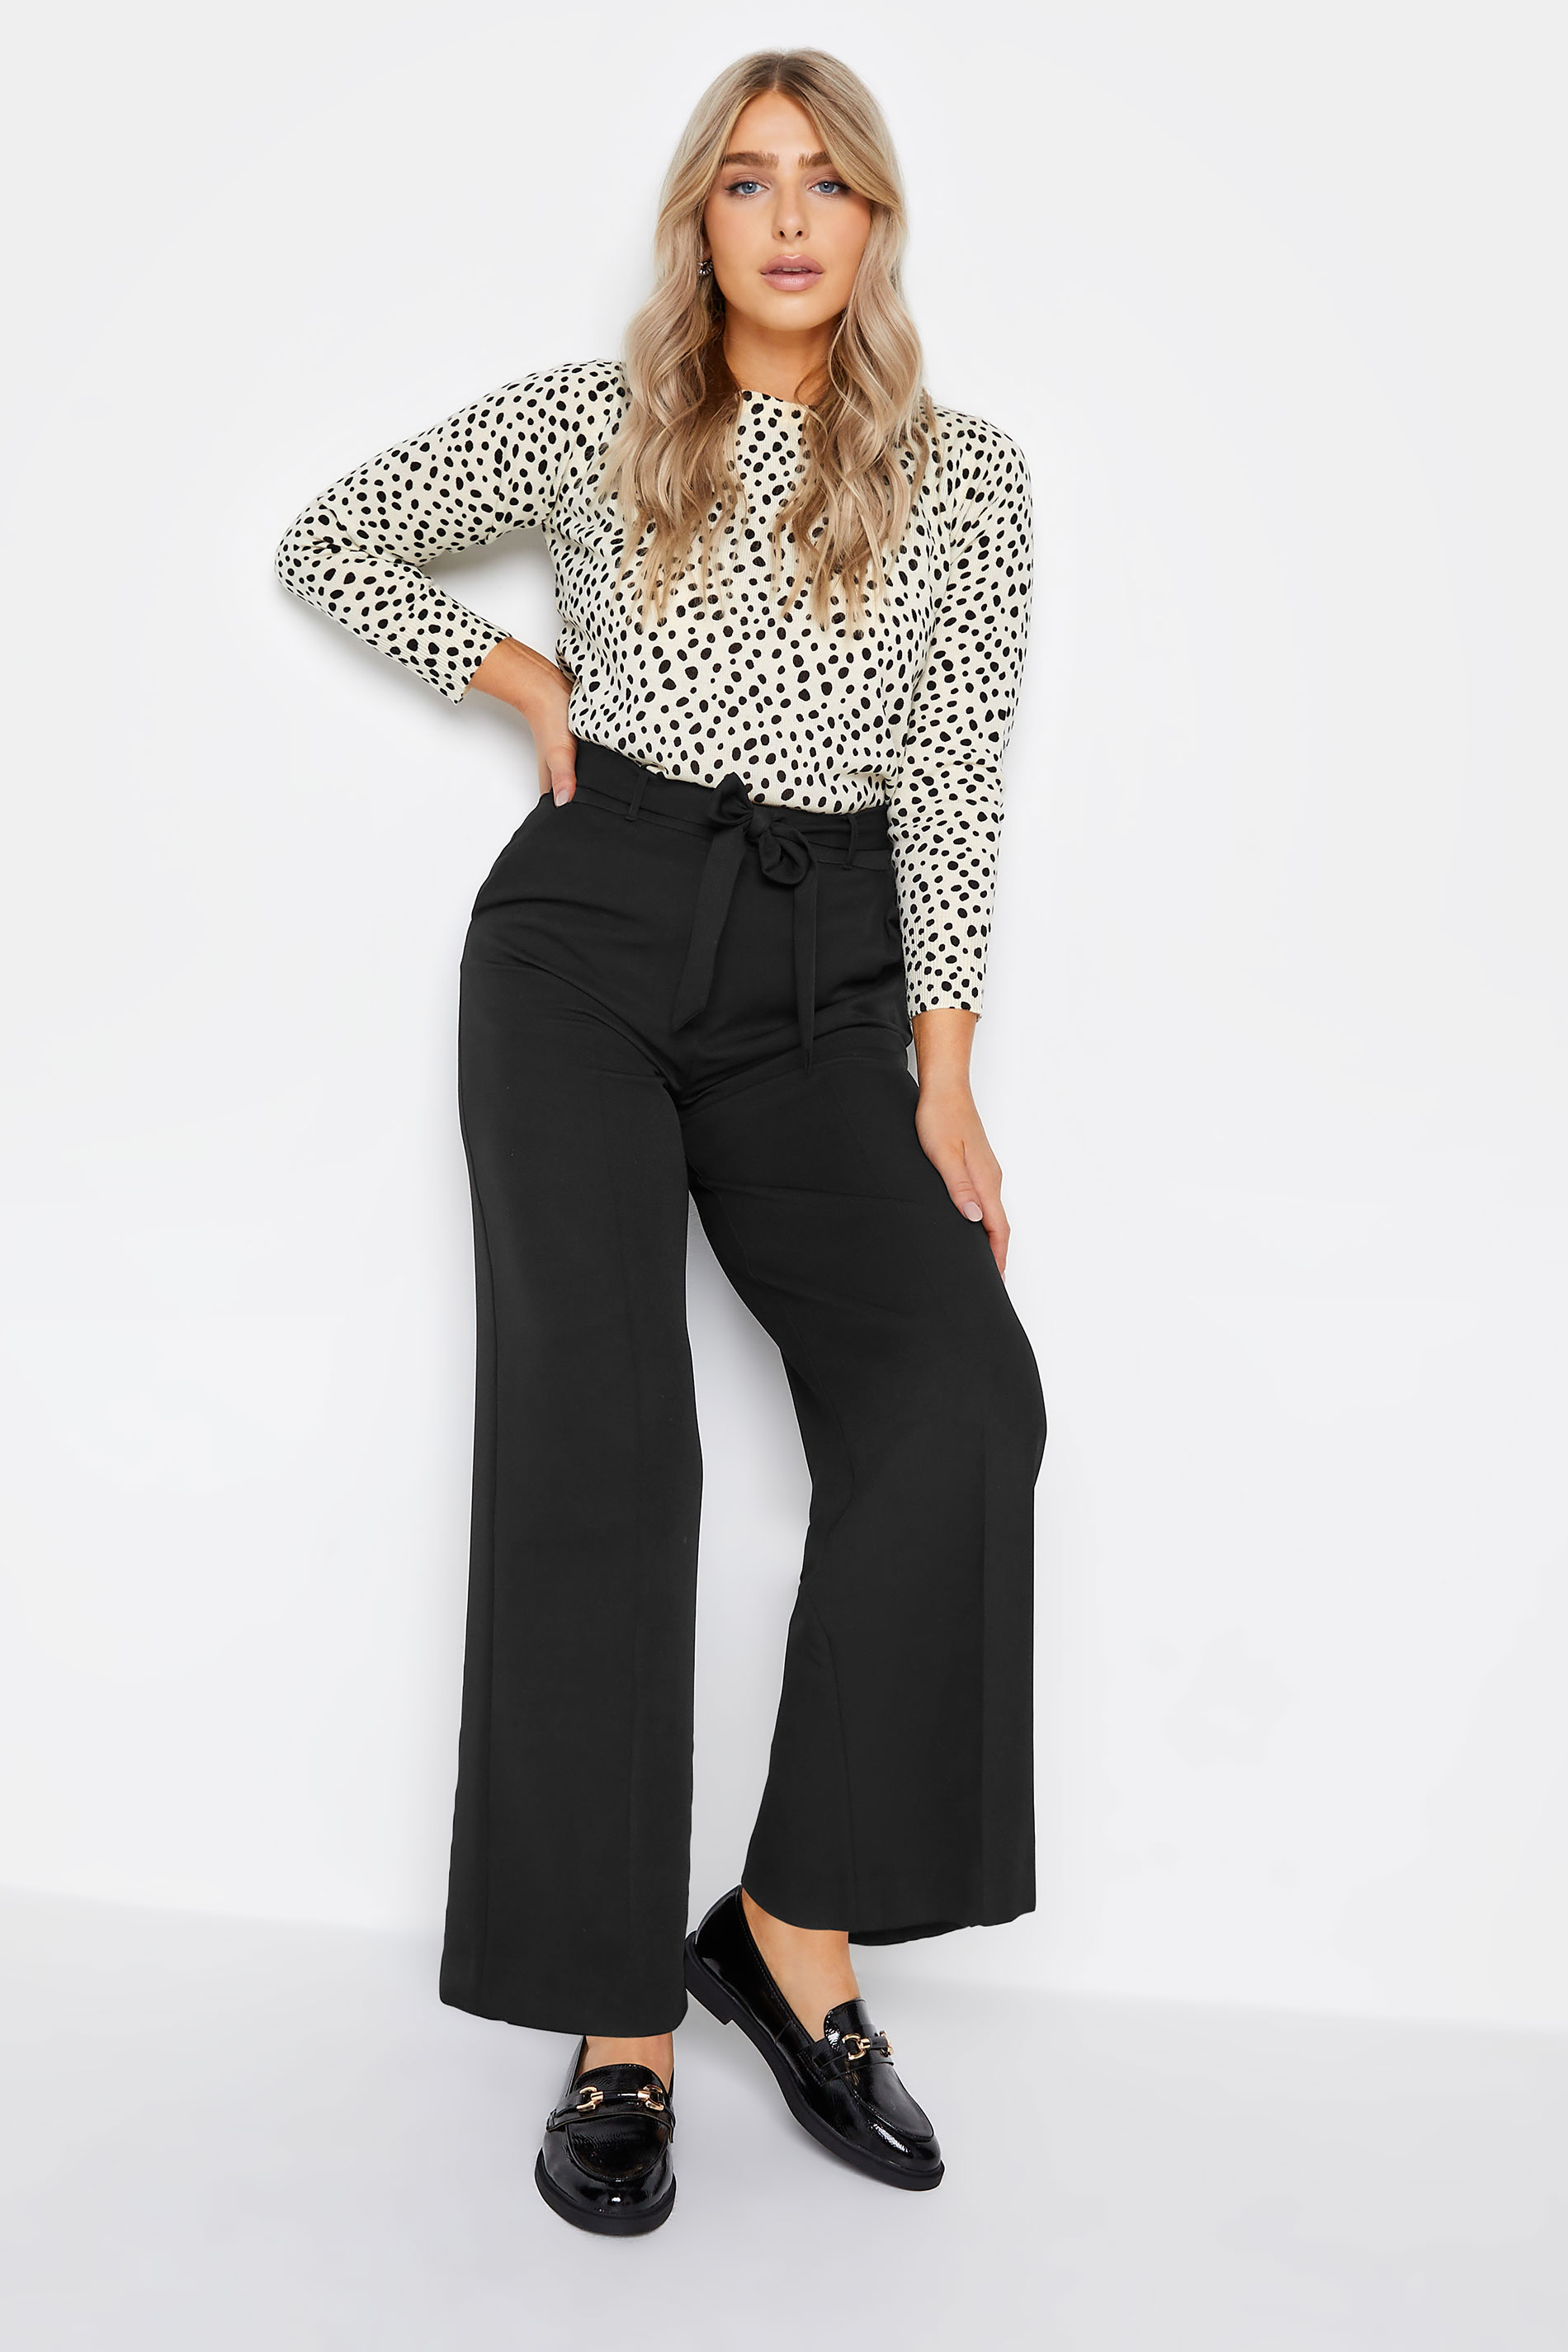 M&Co Black Tailored Wide Leg Belted Trouser | M&Co 2